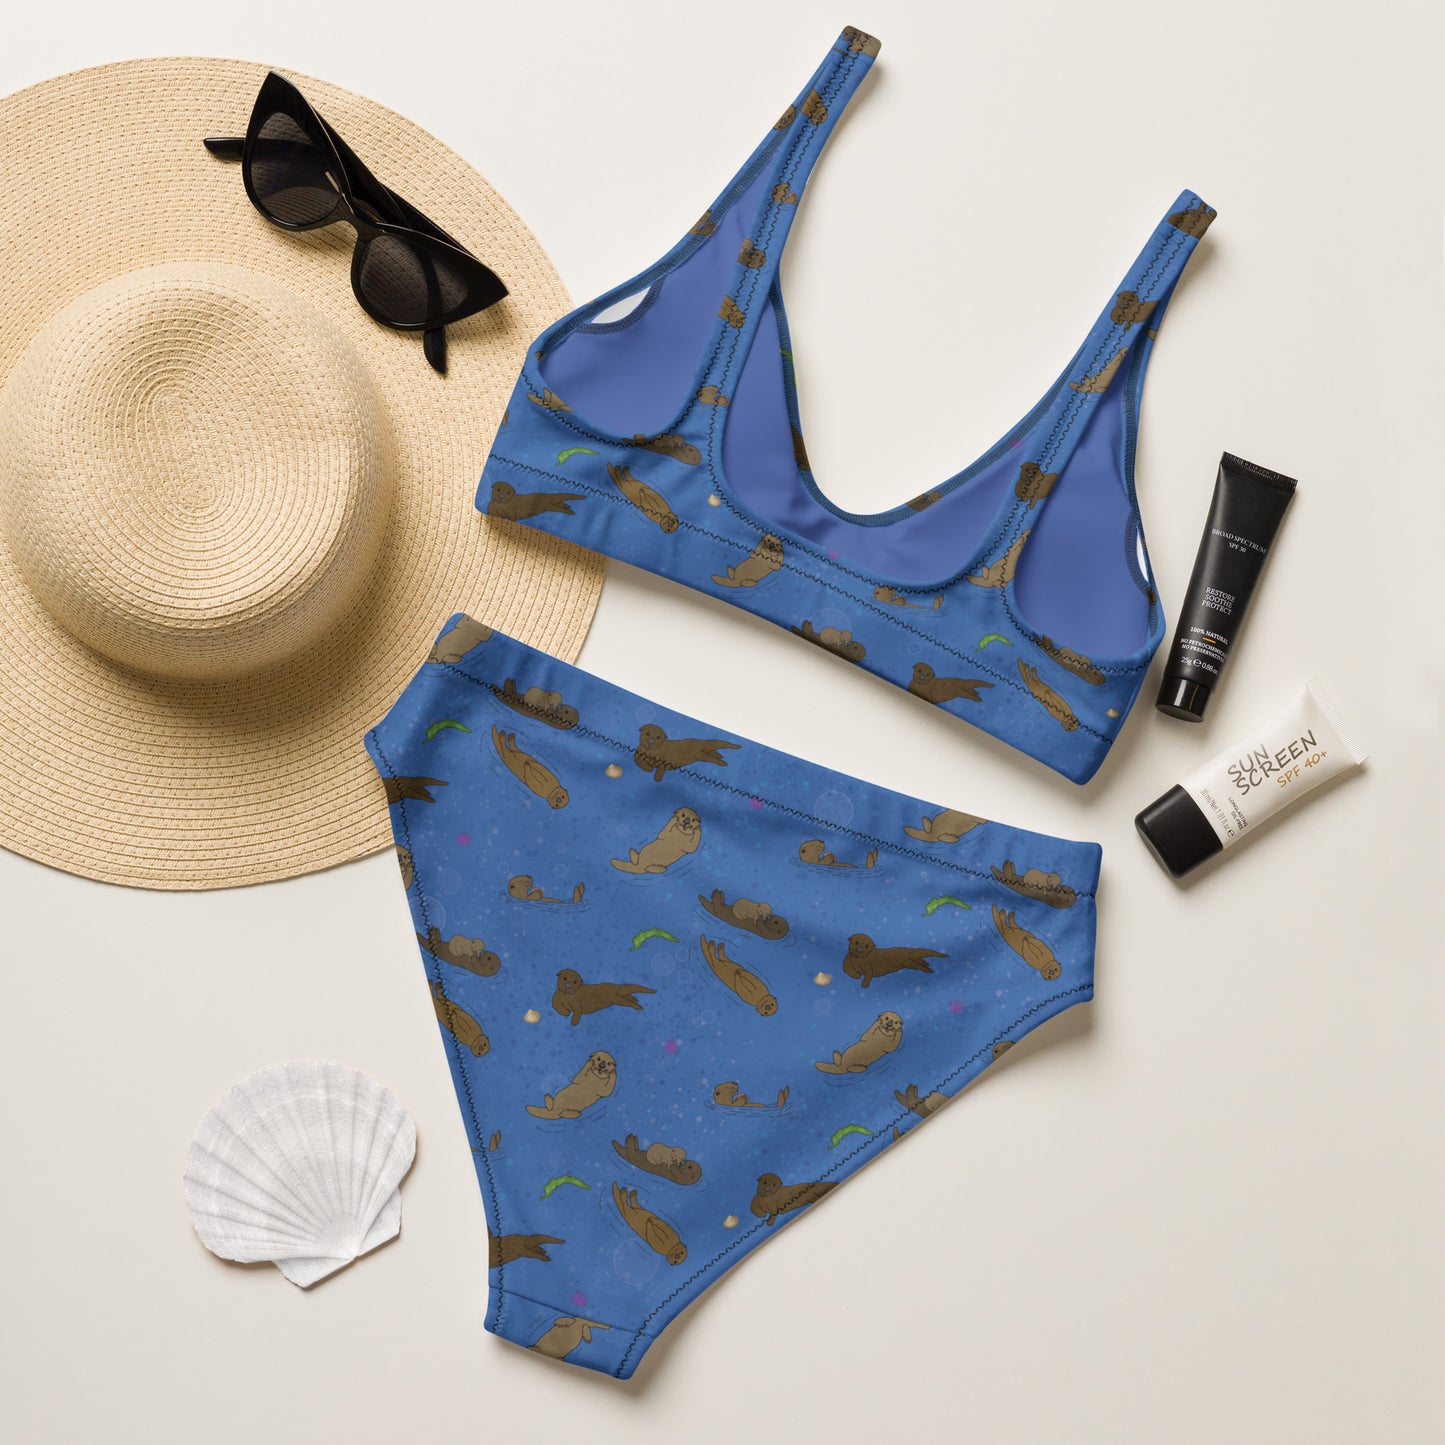 High-waisted bikini with hand-illustrated sea otters patterned on an ocean blue background. Made from recycled polyester combined with stretchable fabric. Has double layers and removable pads. Flat lay view of back shown by sunhat, sunglasses, seashell, and sunscreen.